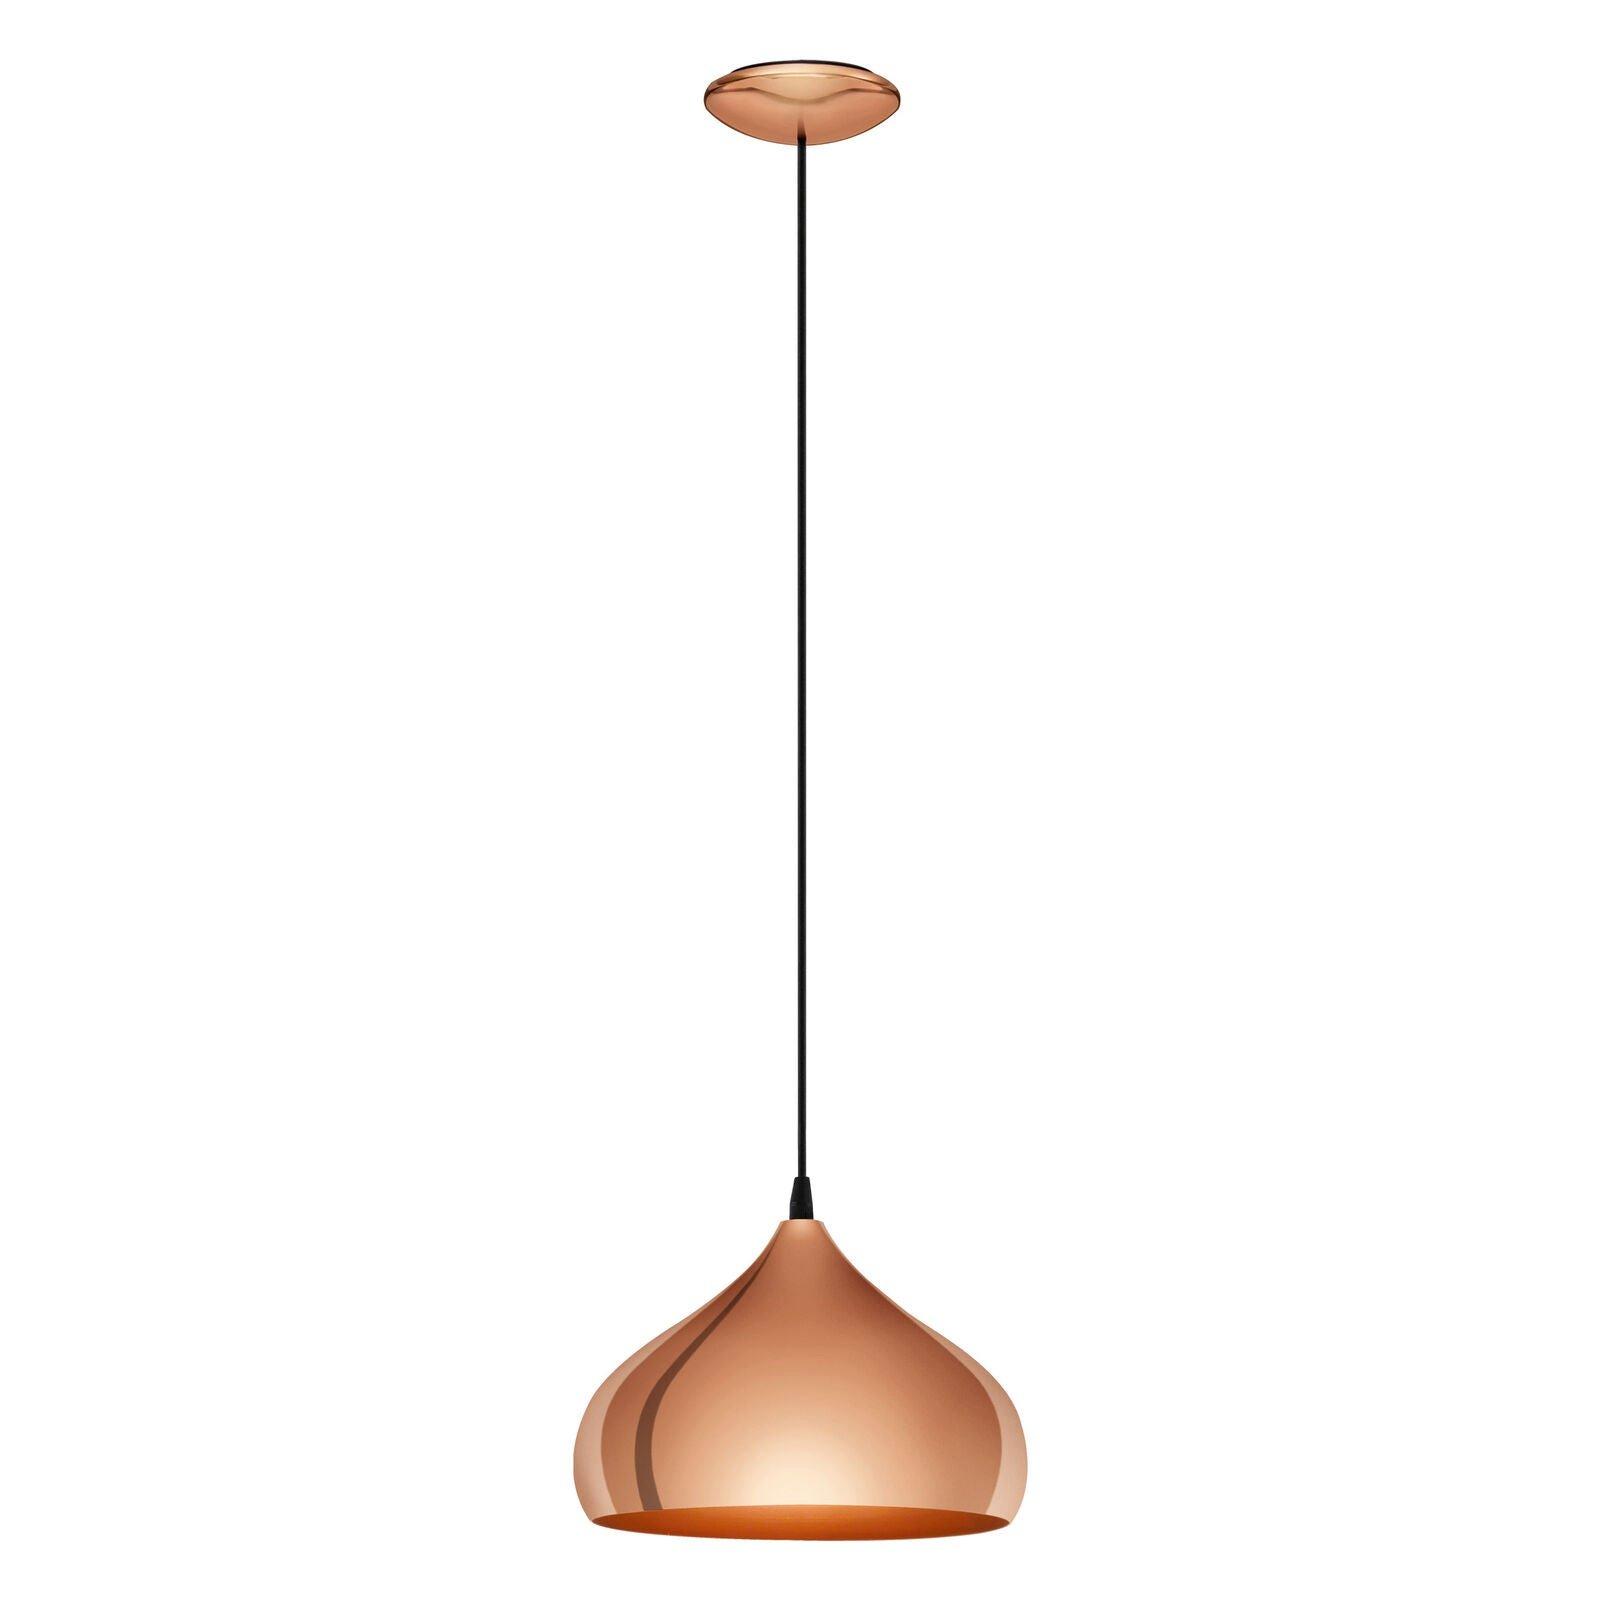 Hanging Ceiling Pendant Light Polished Copper 1 x 60W E27 Hallway Feature Lamp